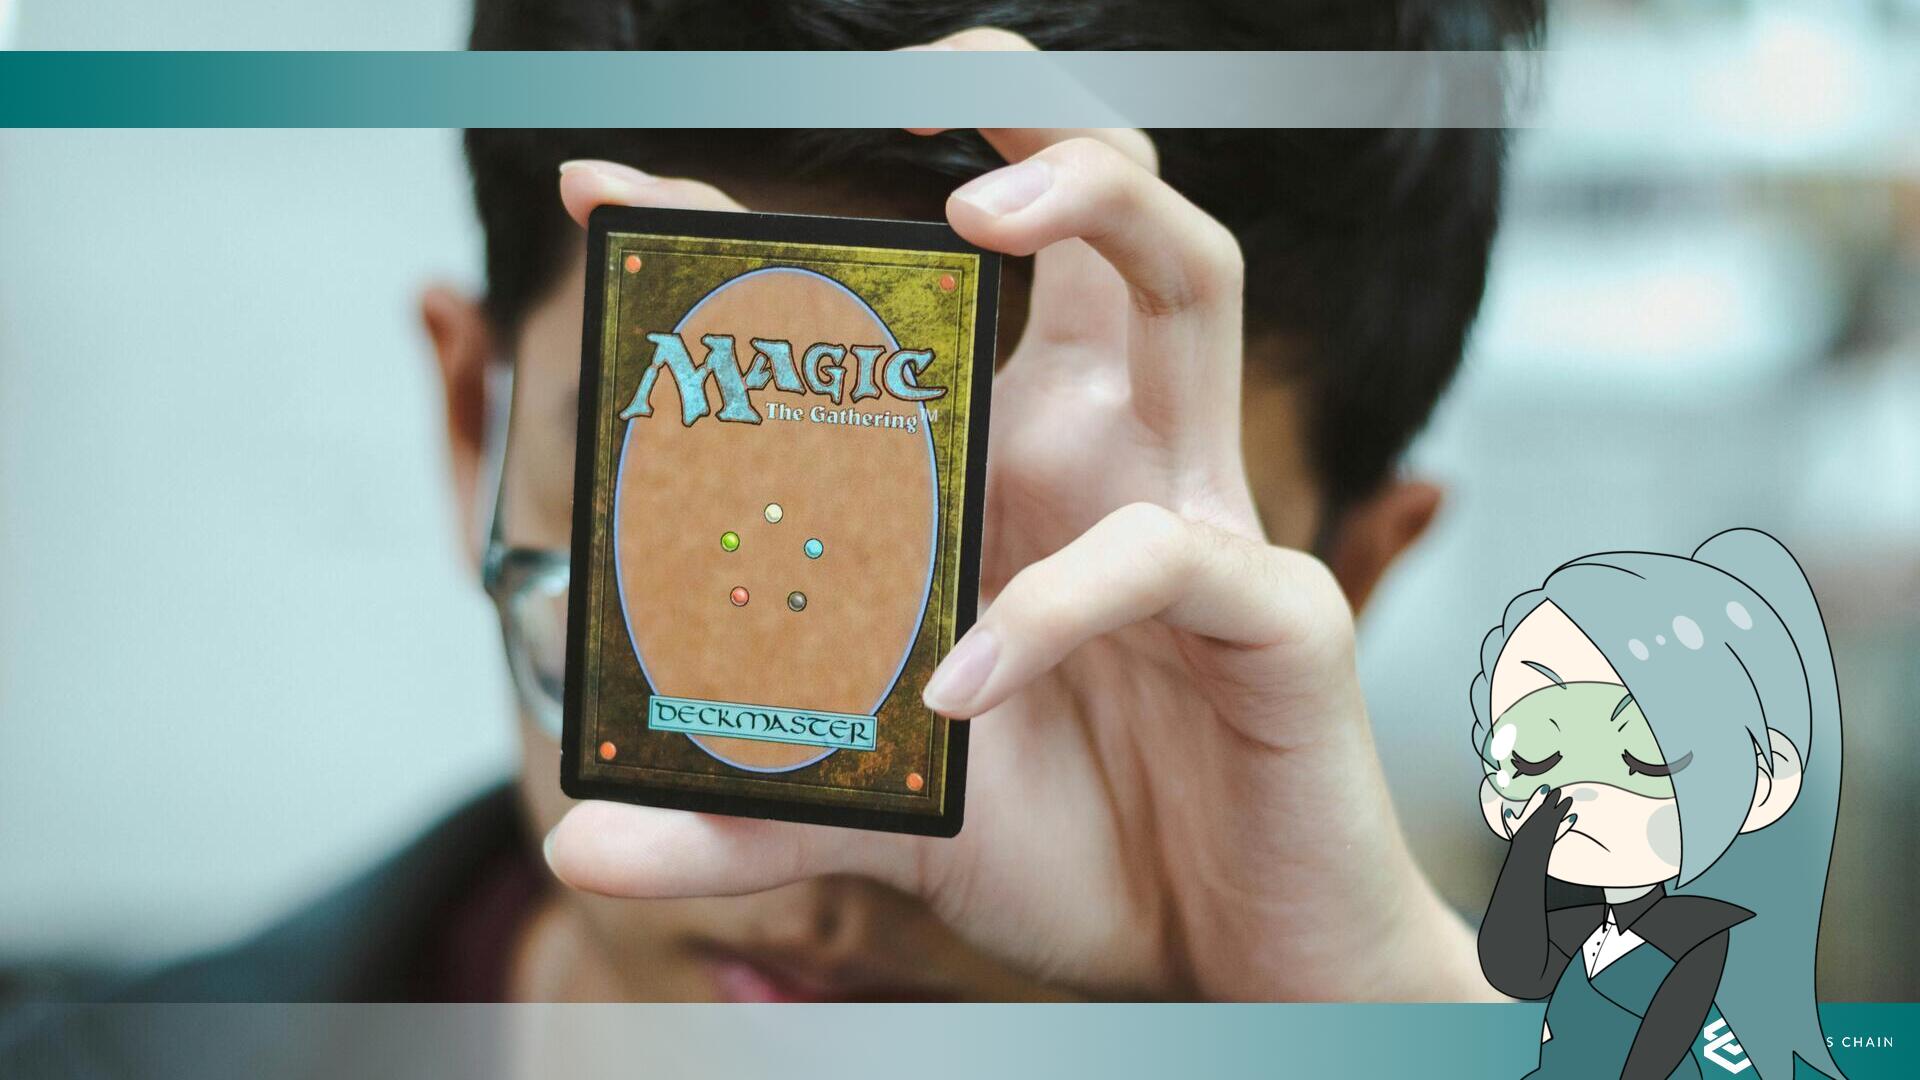  'Magic: The Gathering' Publisher Denies, Then Admits, Using AI Art In Promo Image.